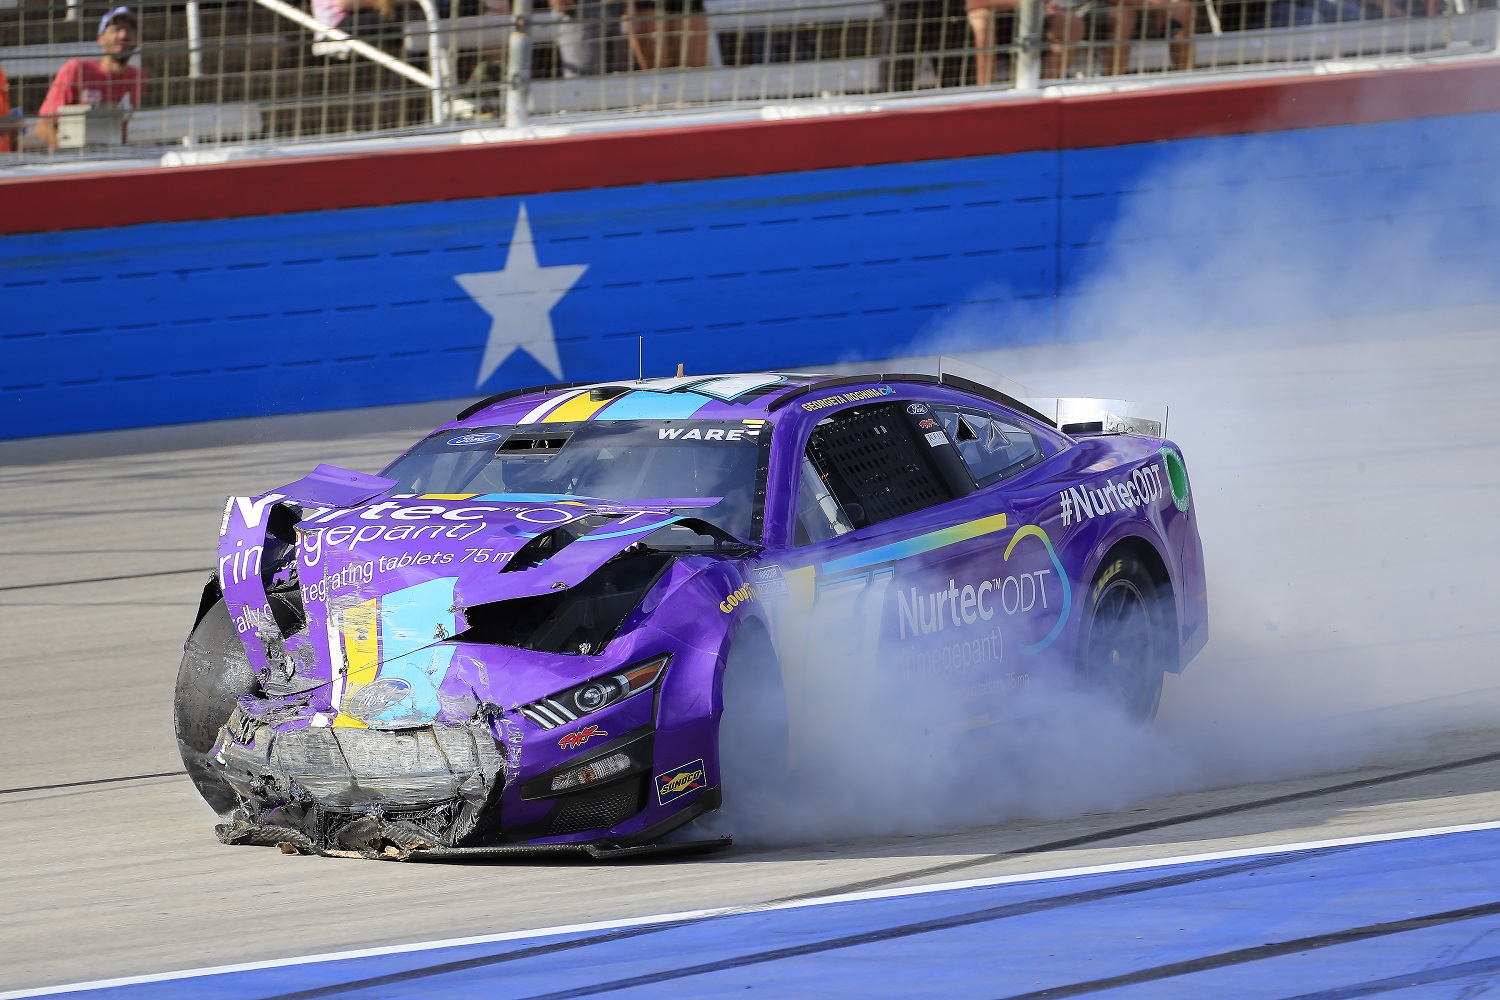 Cody Ware after a big impact in Turn 4 during the NASCAR Cup Series Autotrader EchoPark Automotive 500 on Sept. 25, 2022 at the Texas Motor Speedway in Fort Worth, Texas. | David J. Griffin/Icon Sportswire via Getty Images